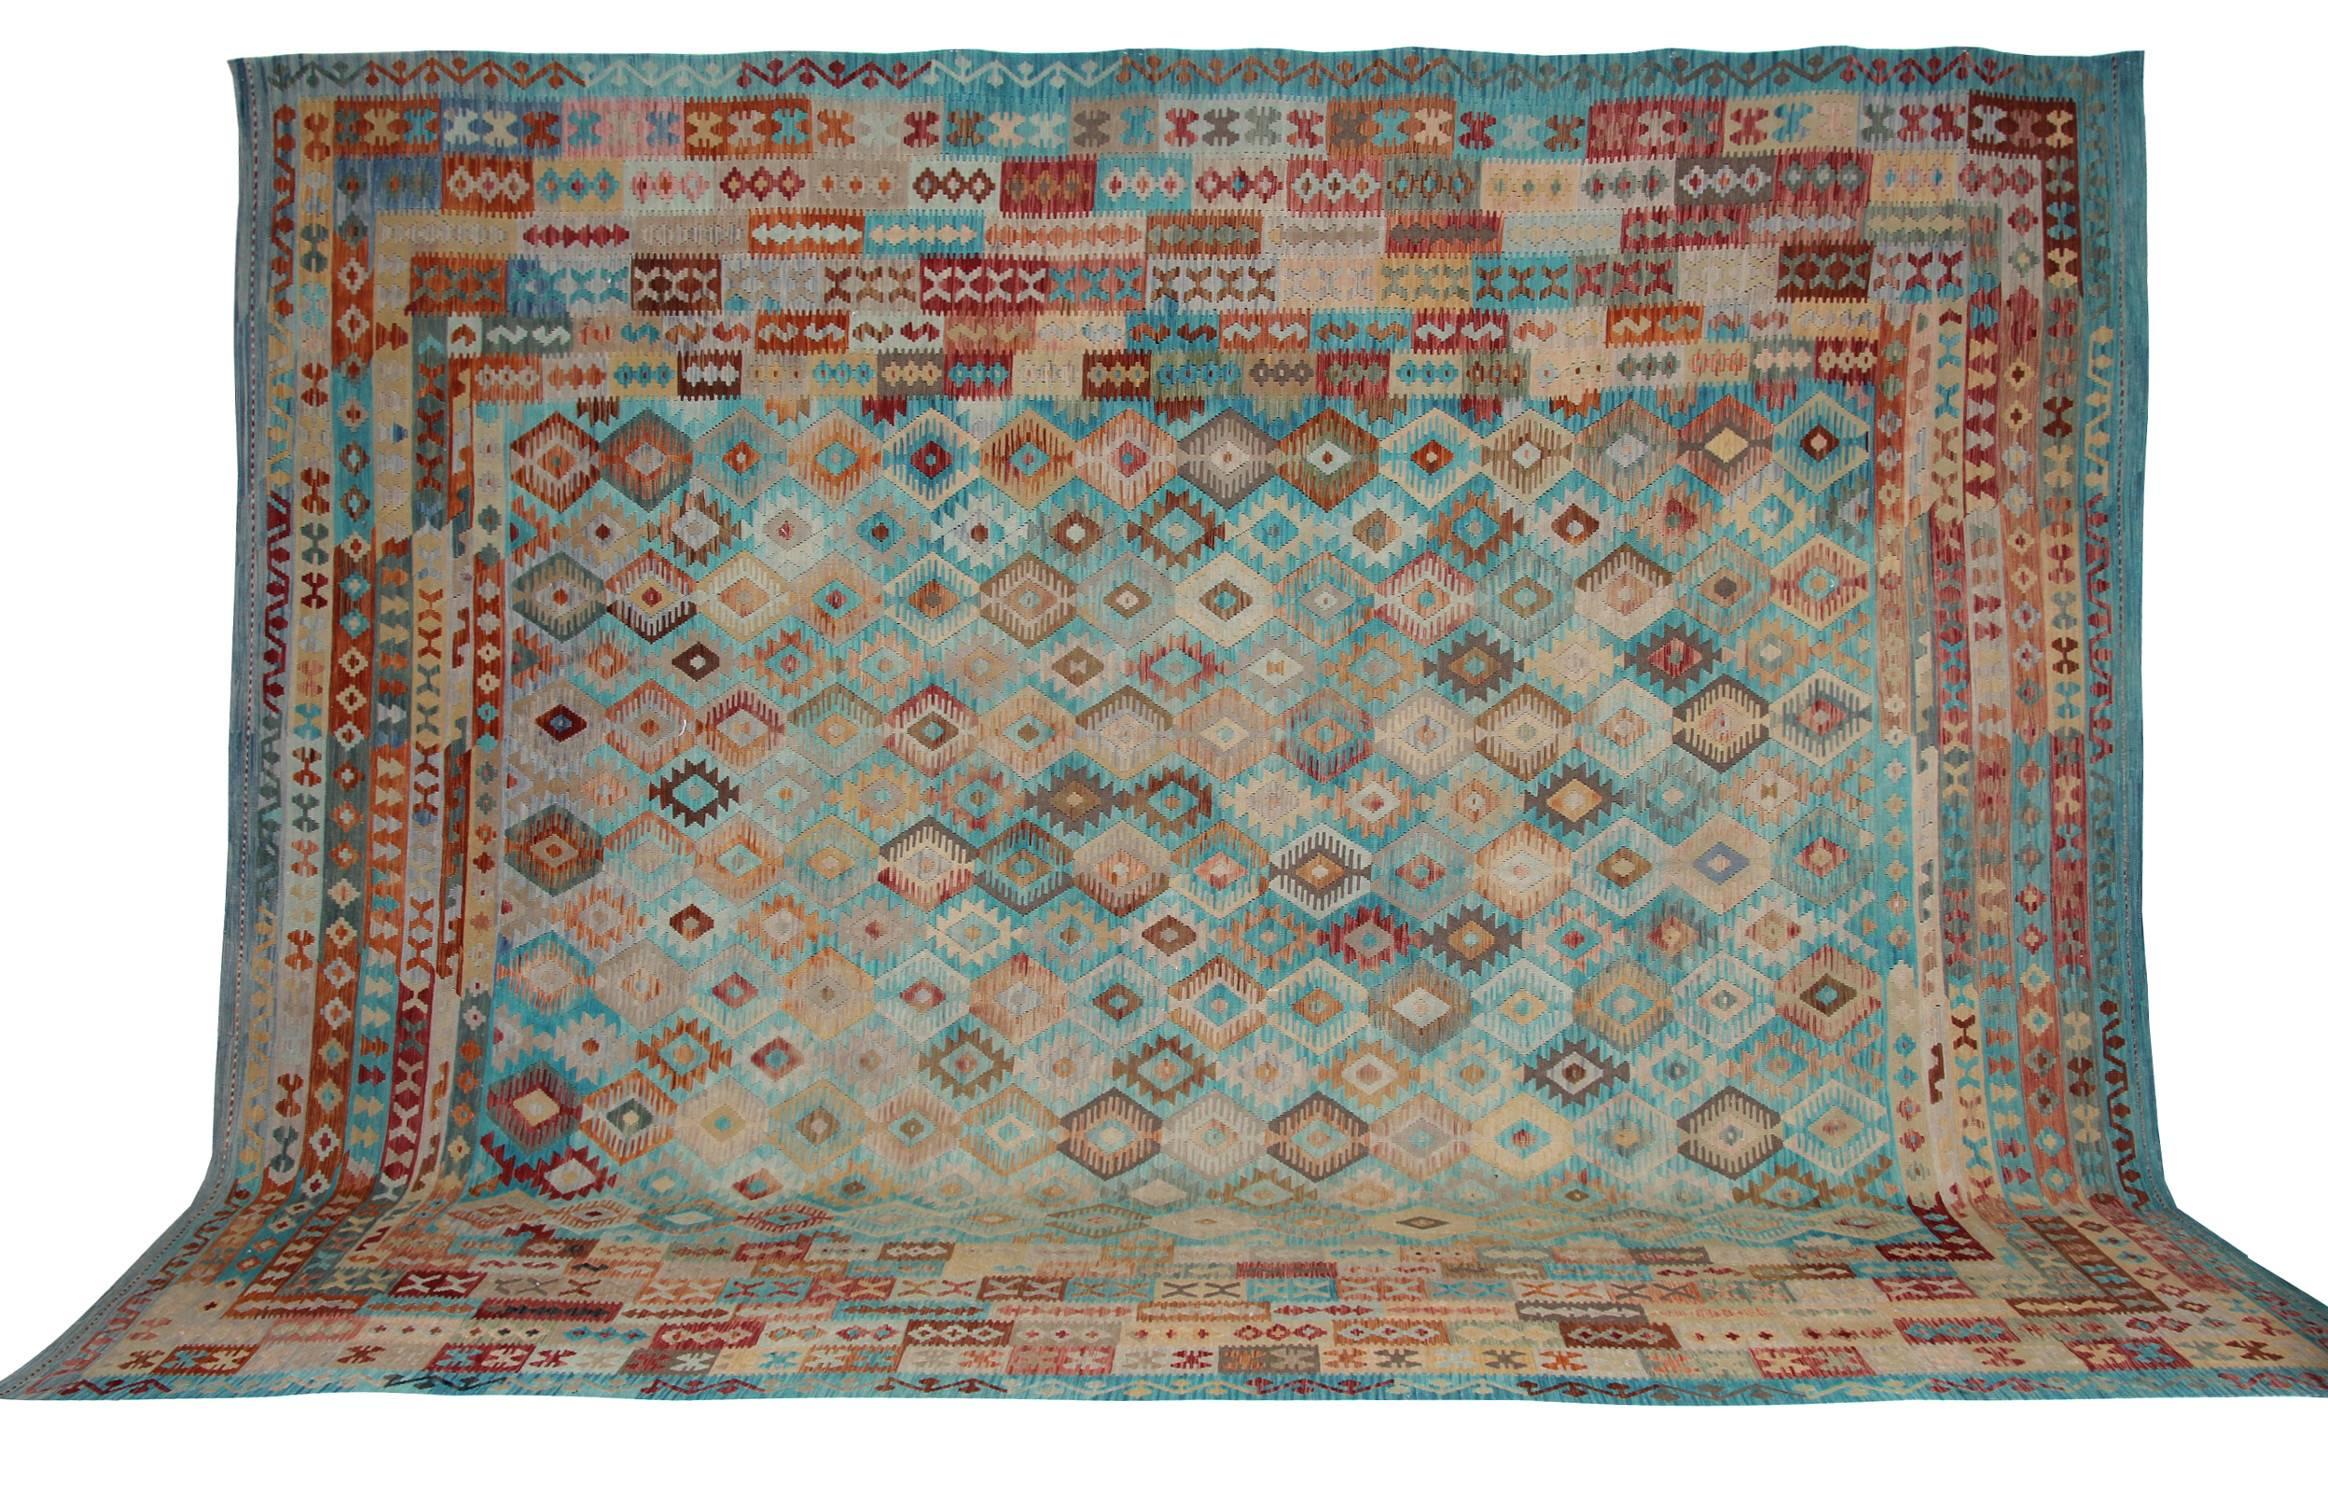 This tribal rug is also known as an 'Ocean temptation' due to its appearance, which brings to mind fresh coastal air. The brilliant aquamarine in muted shades gives the sensation and the desire to be in the ocean and swim freely, adding to the